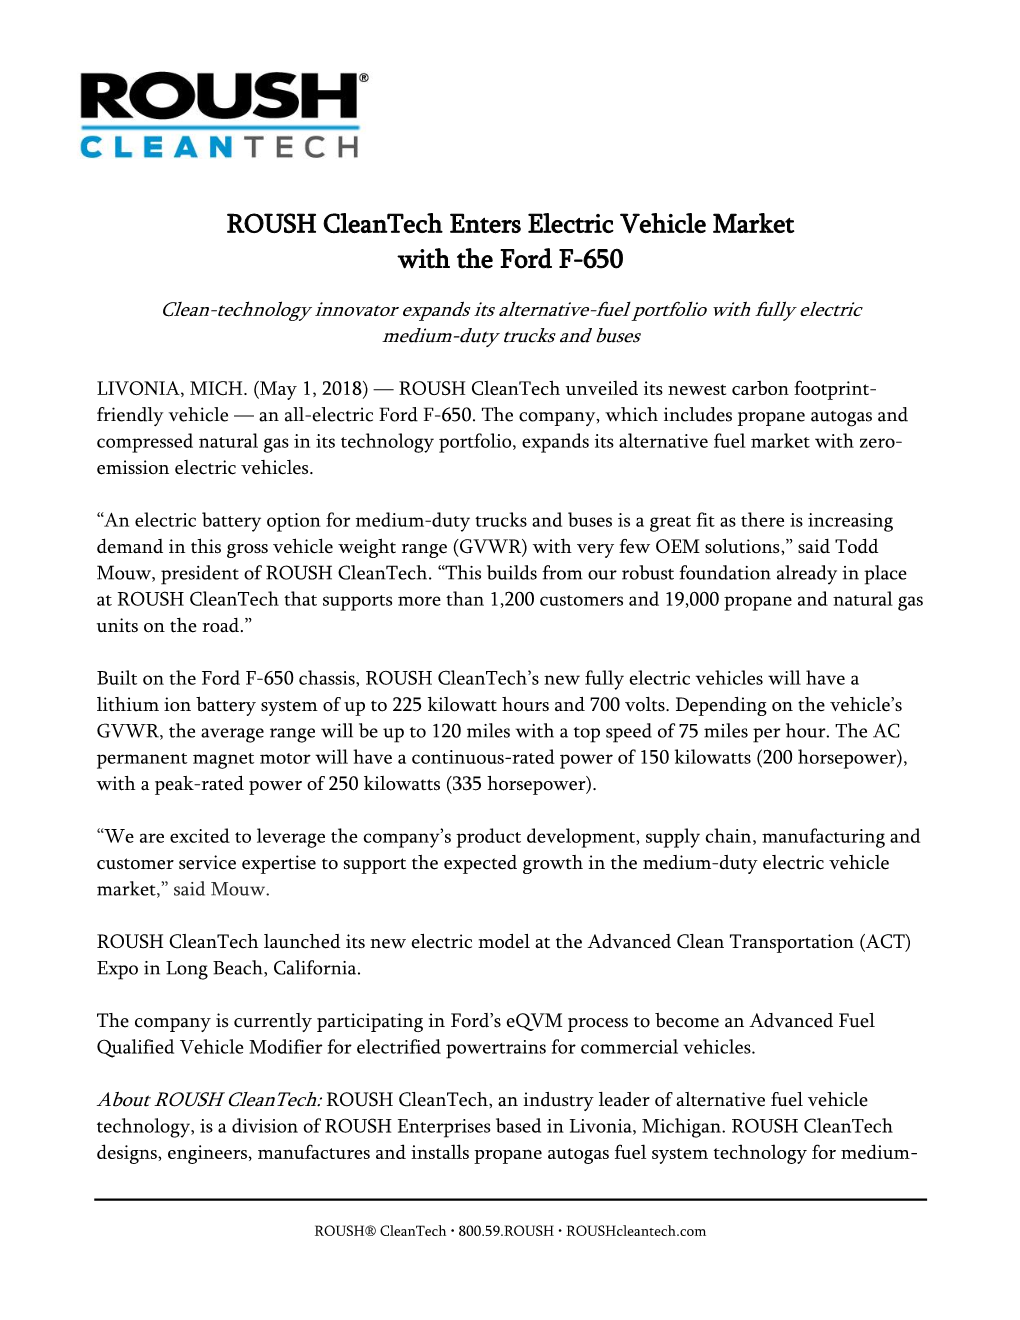 ROUSH Cleantech Enters Electric Vehicle Market with the Ford F-650